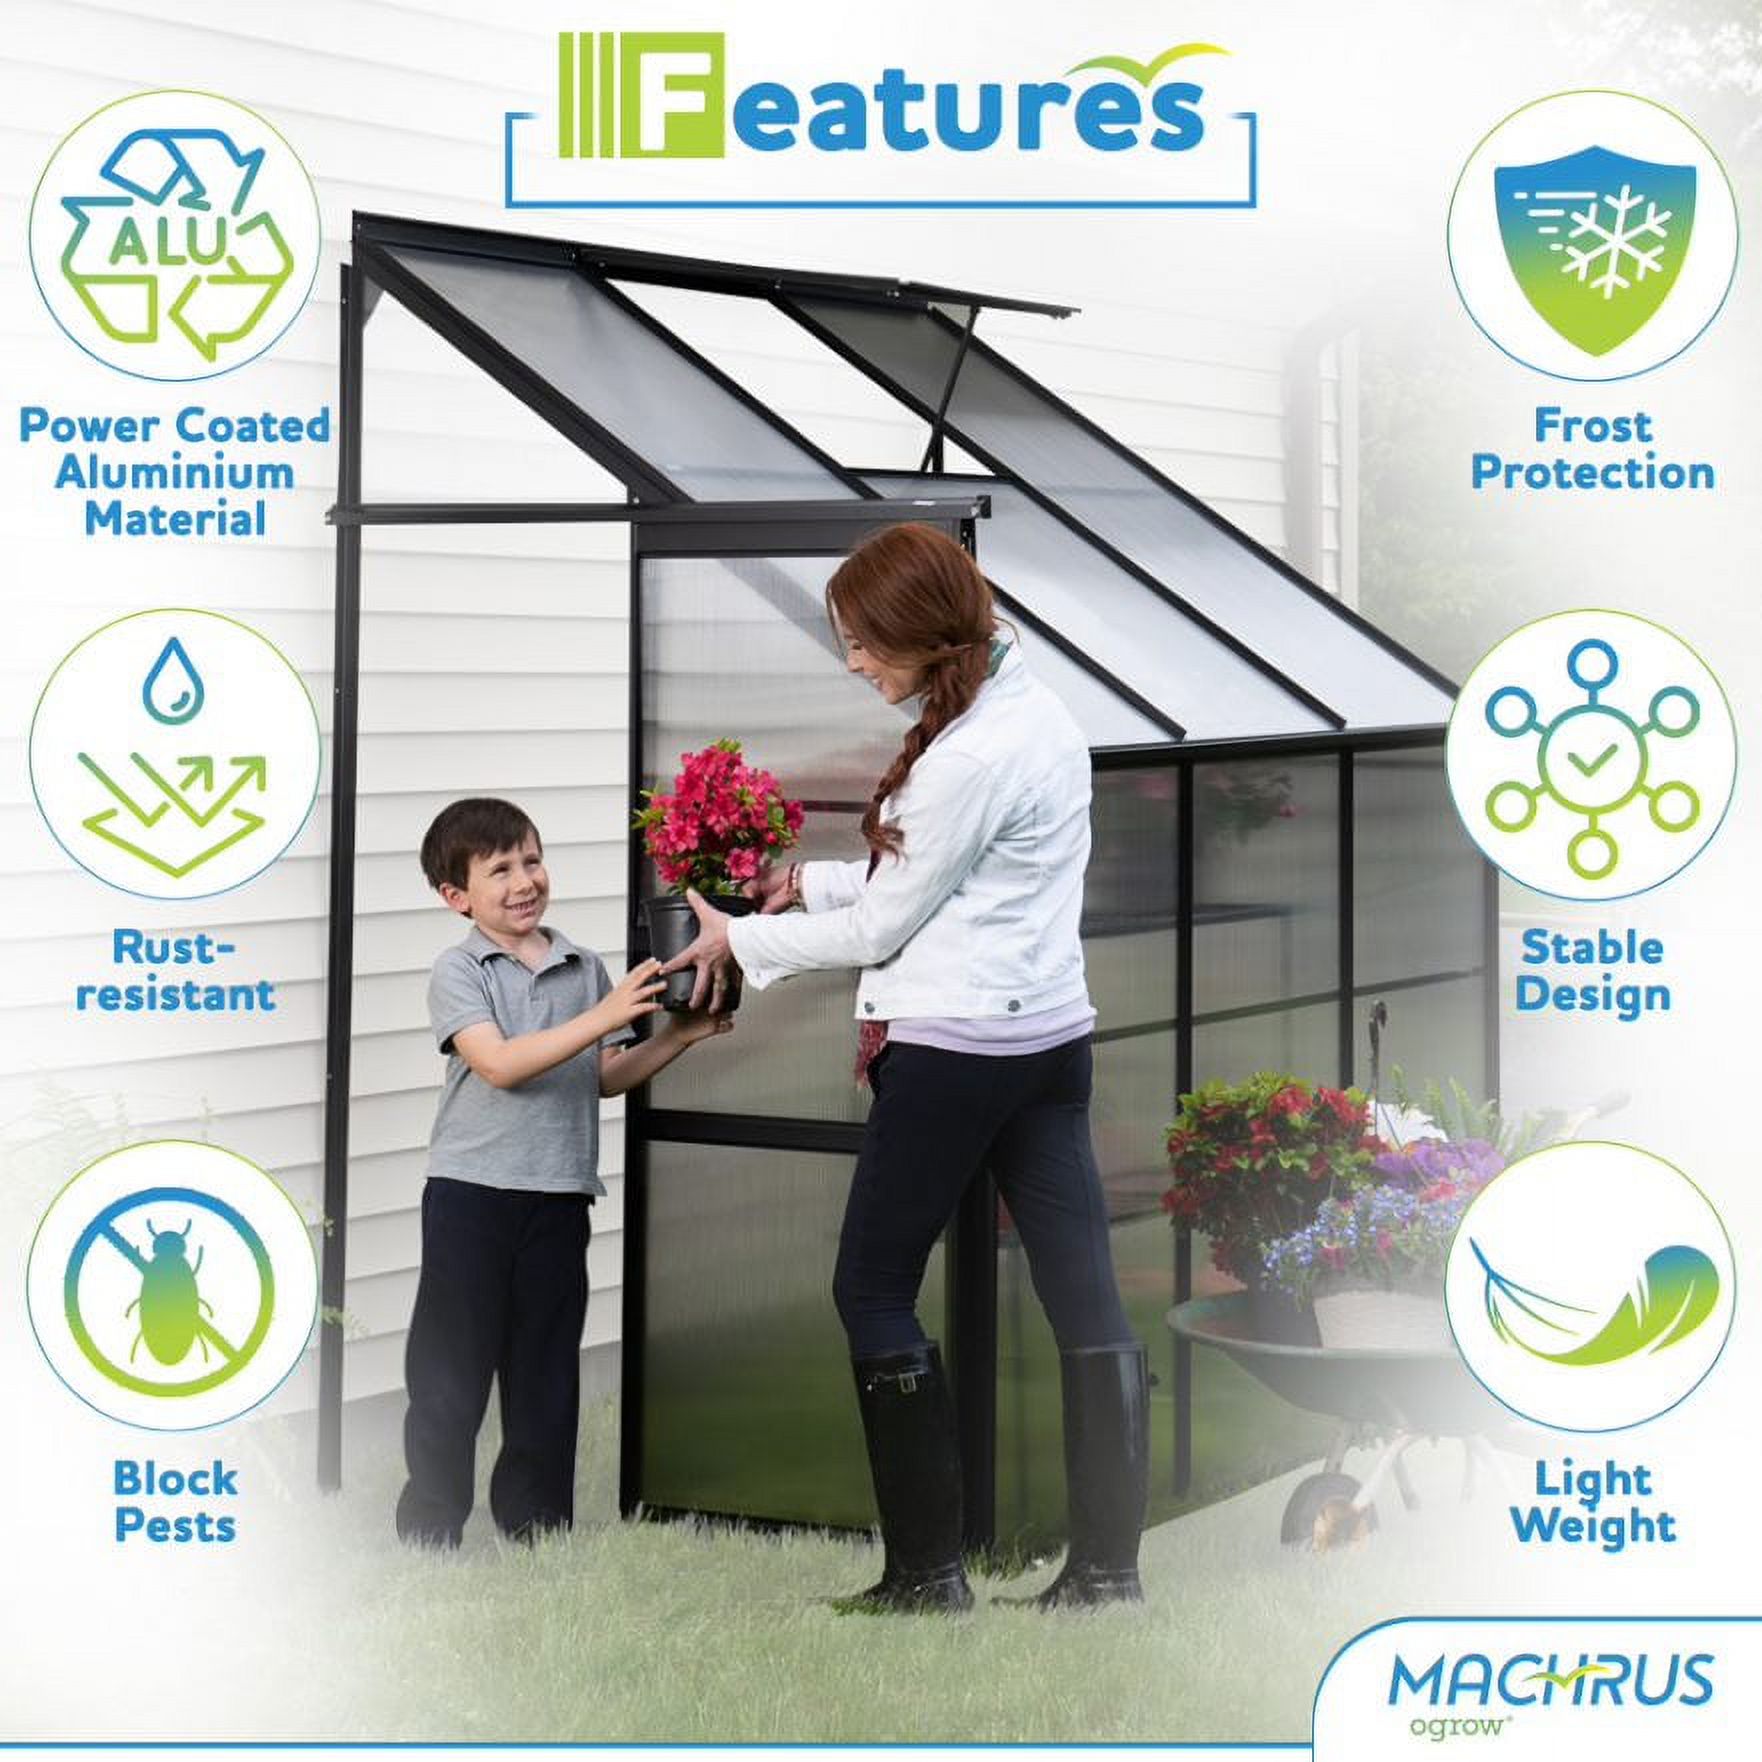 Machrus Ogrow 4 x 6 FT Lean-To-Wall Walk-In Greenhouse with Sliding Door and Adjustable Roof Vent - image 3 of 7